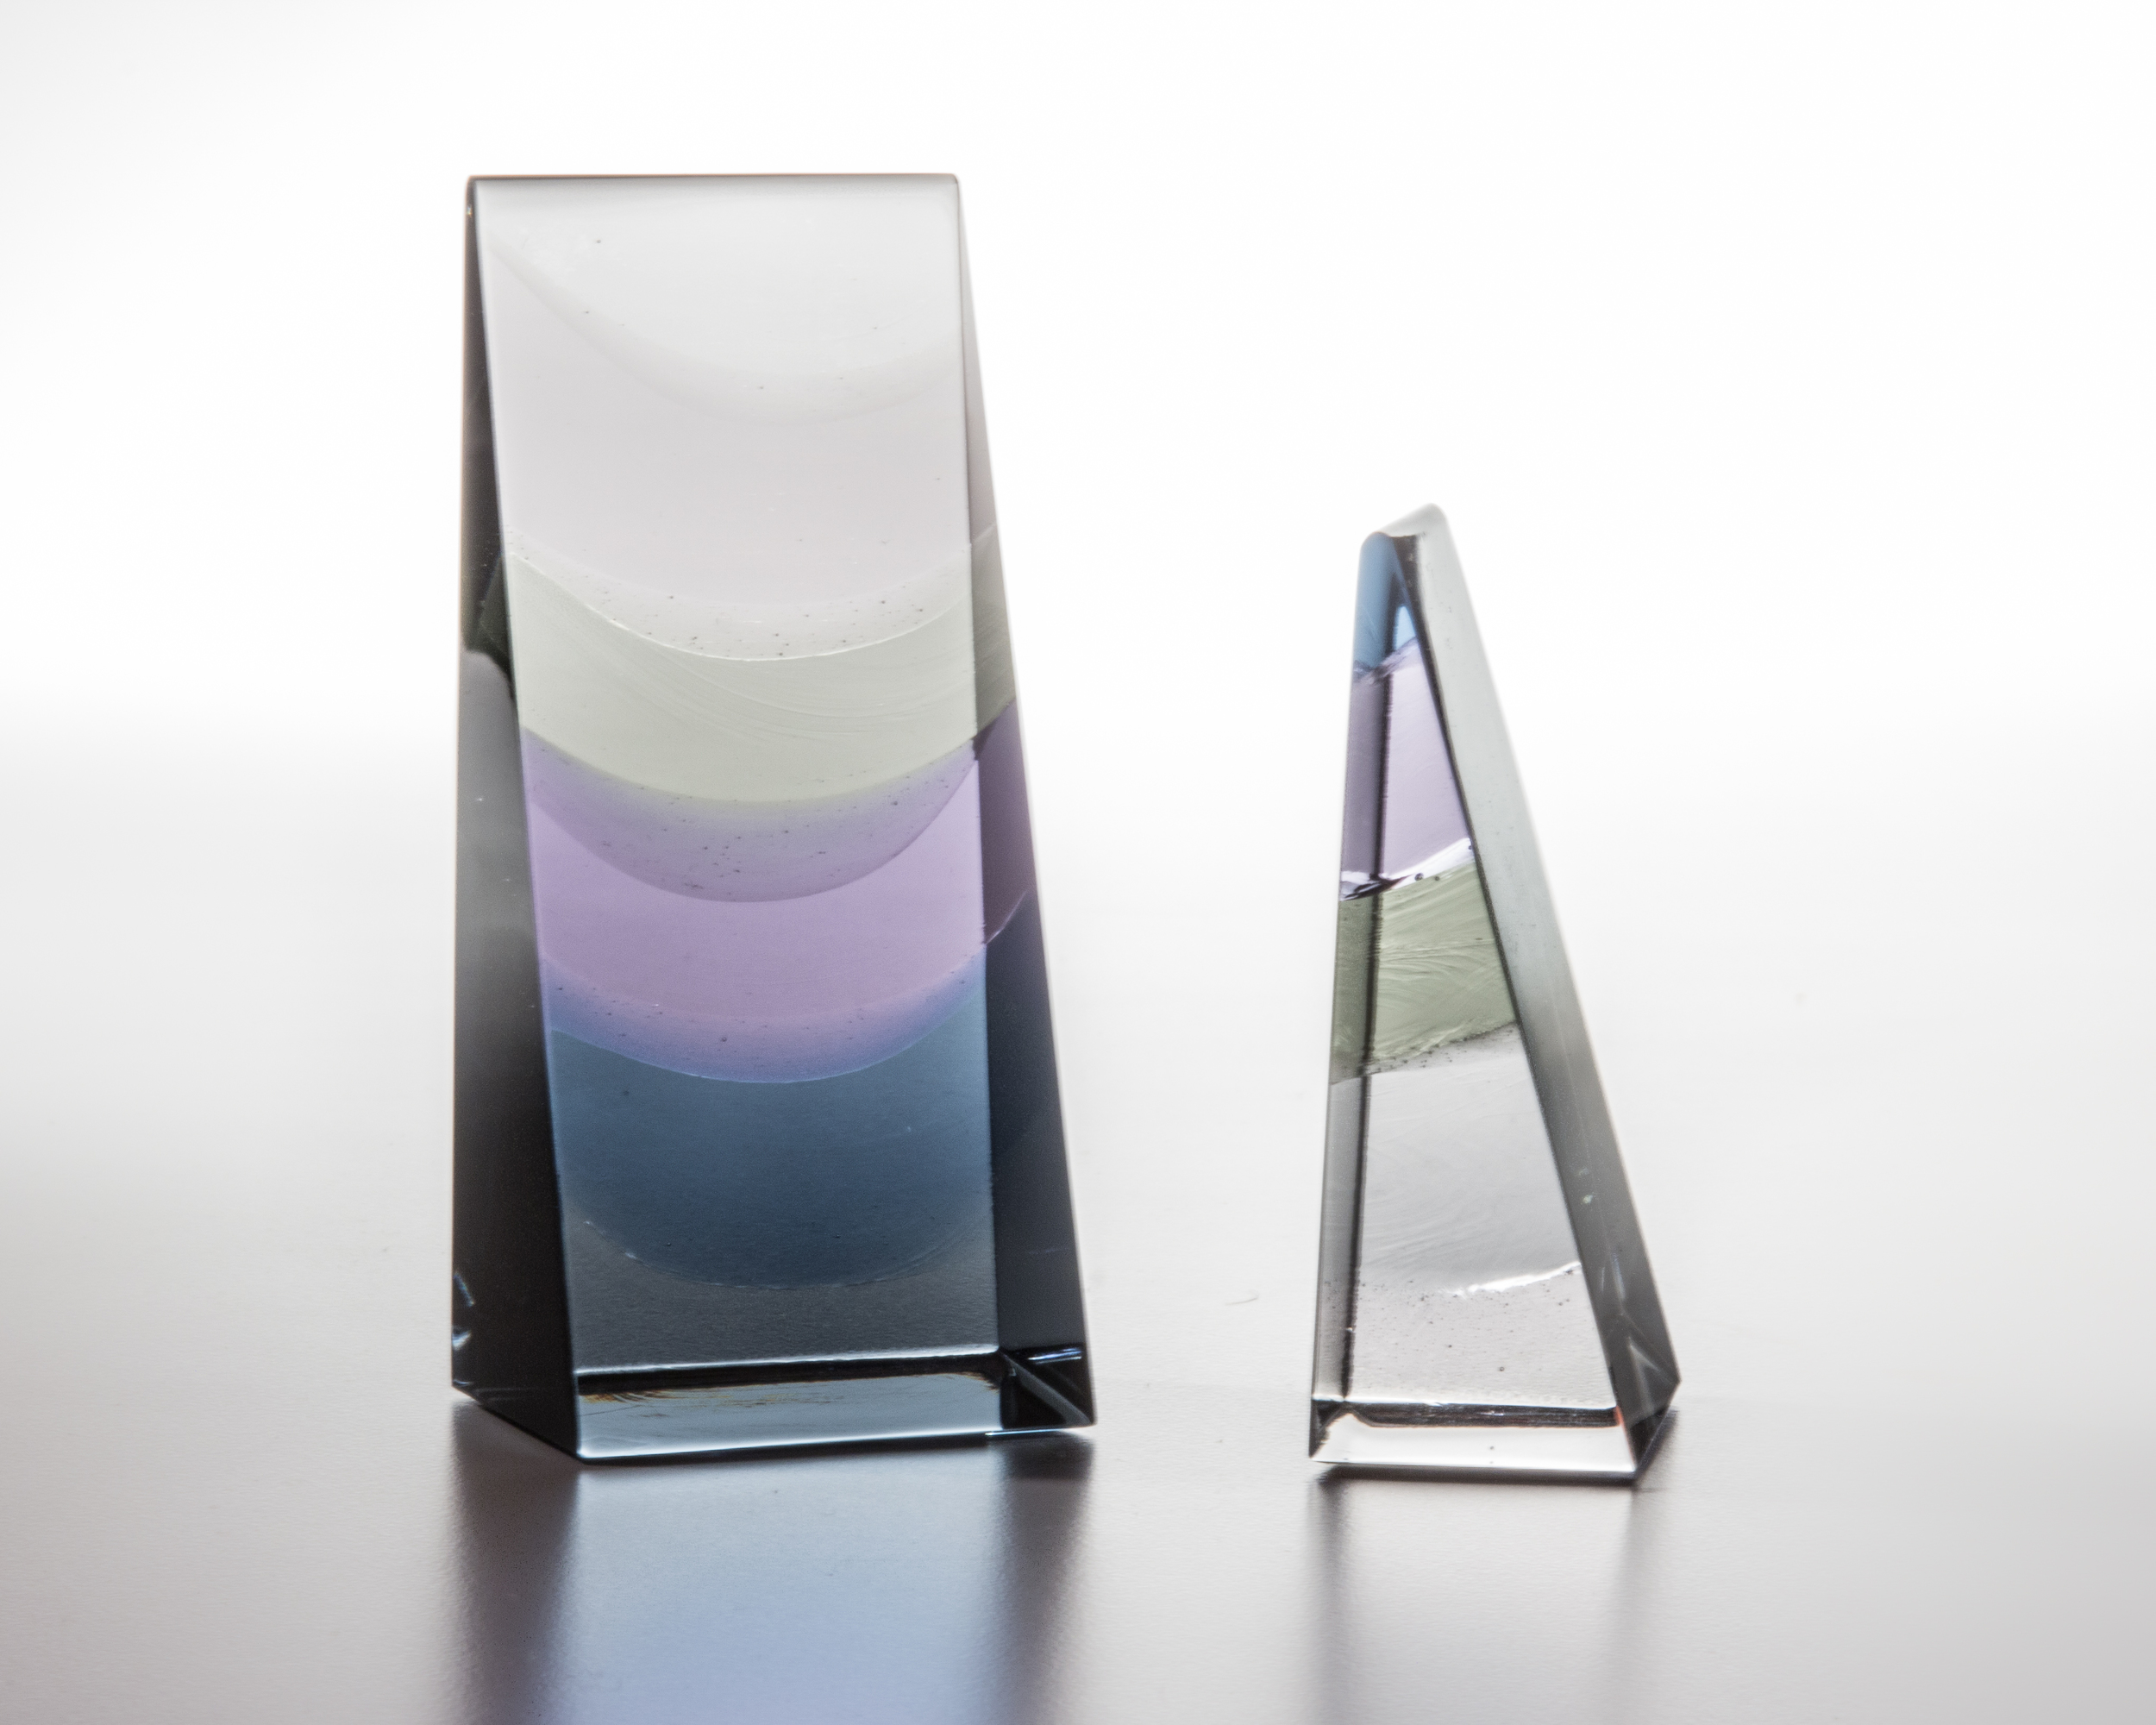   Polychromasia&nbsp;3+4 , cast, cut and polished glass, 2013 